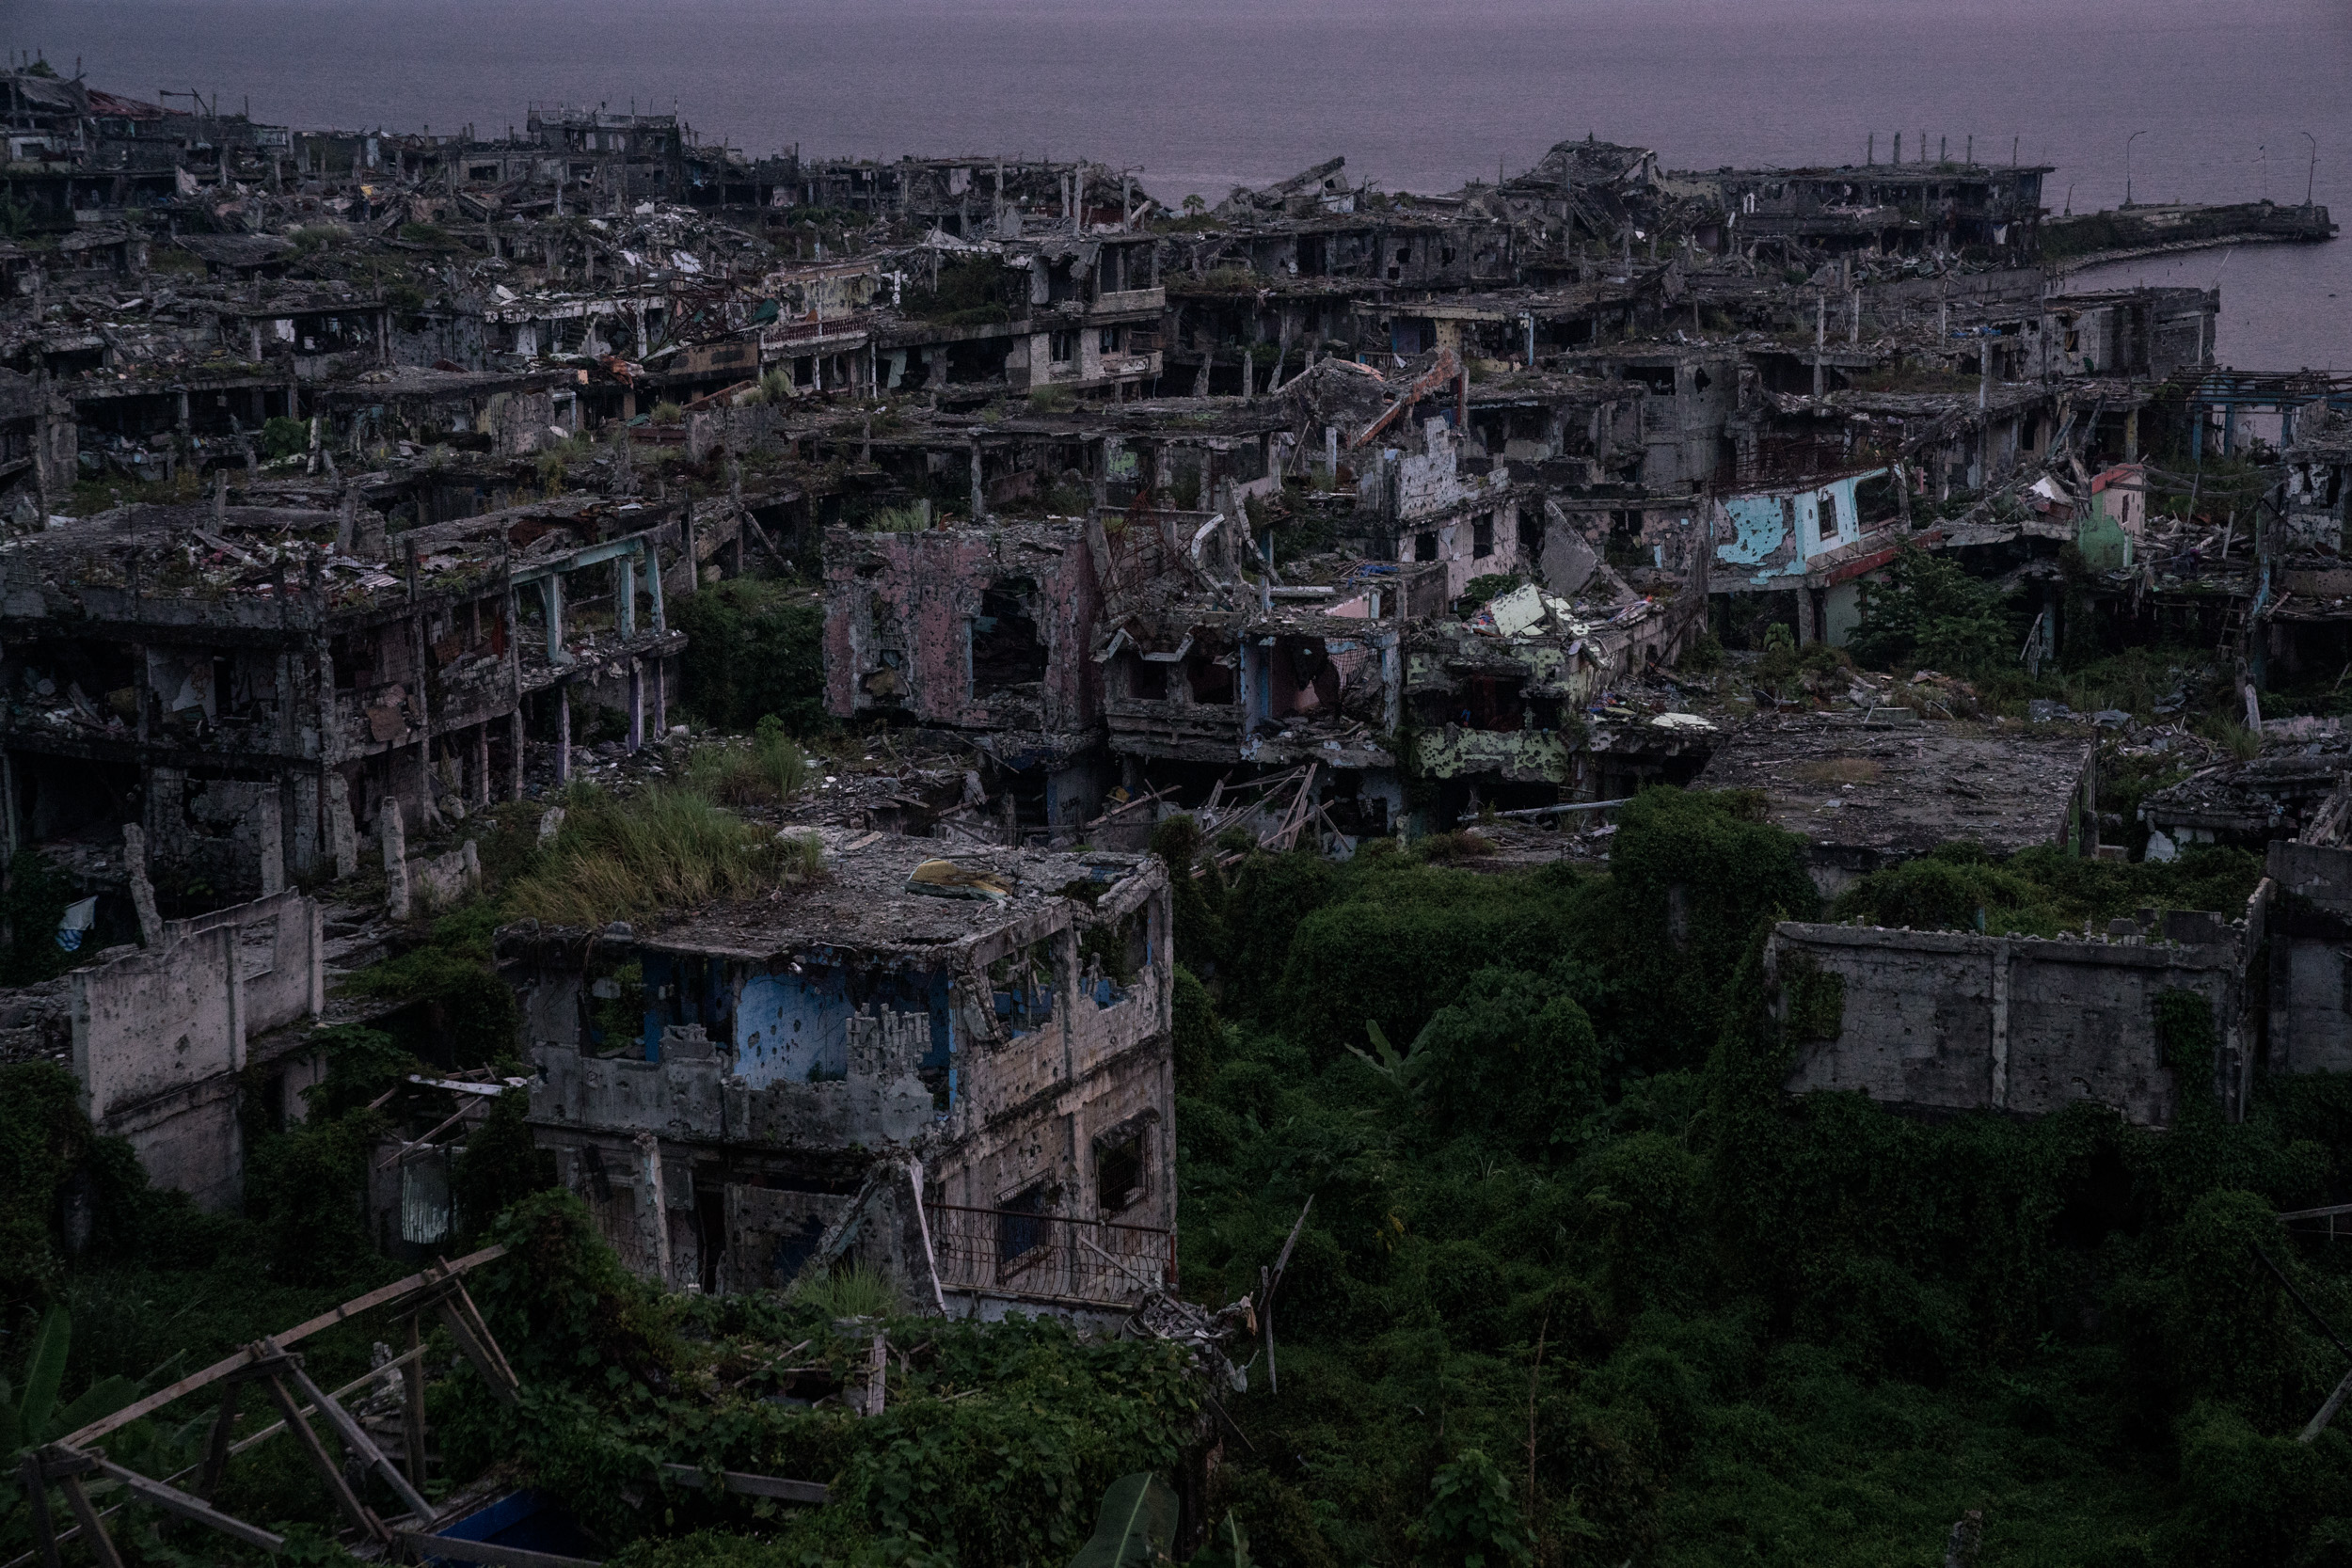  Destroyed buildings in the main battle area of the Marawi siege are seen during sunset, still damaged more than a year since the Philippine military declared the Muslim-majority city of Marawi “liberated” from ISIS-linked militants. But the ravaged 